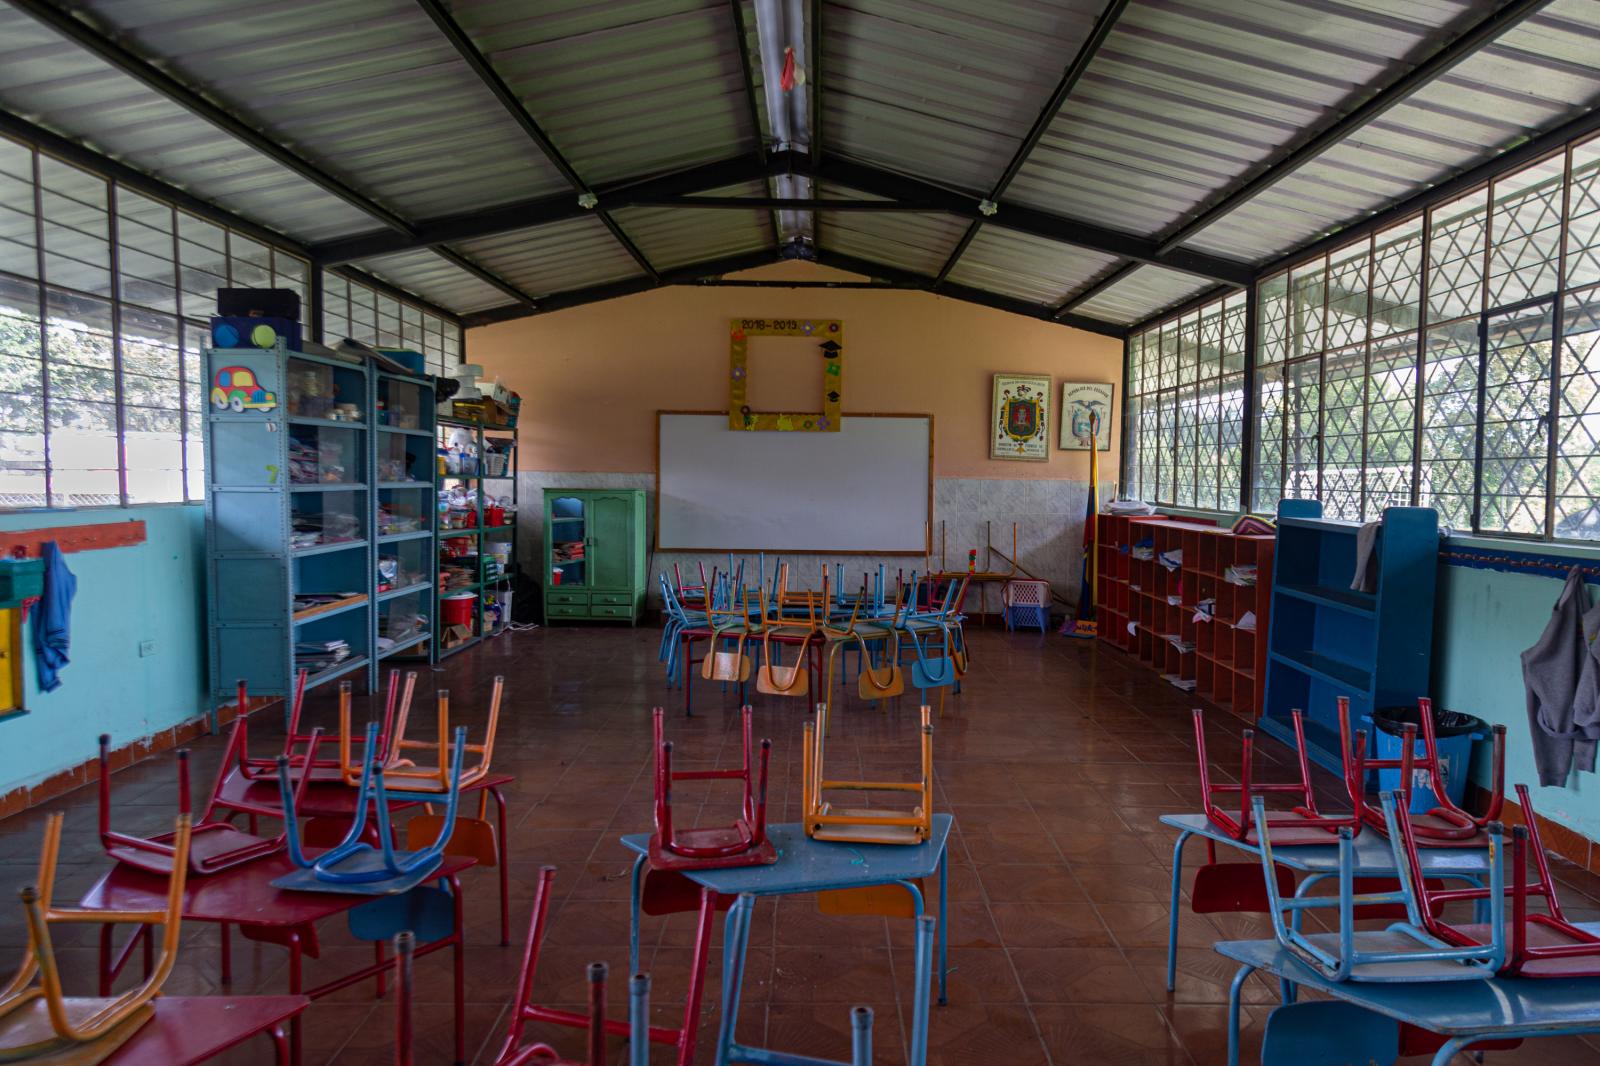 One of the classrooms of Rupert...&eacute;s Y&eacute;pez.